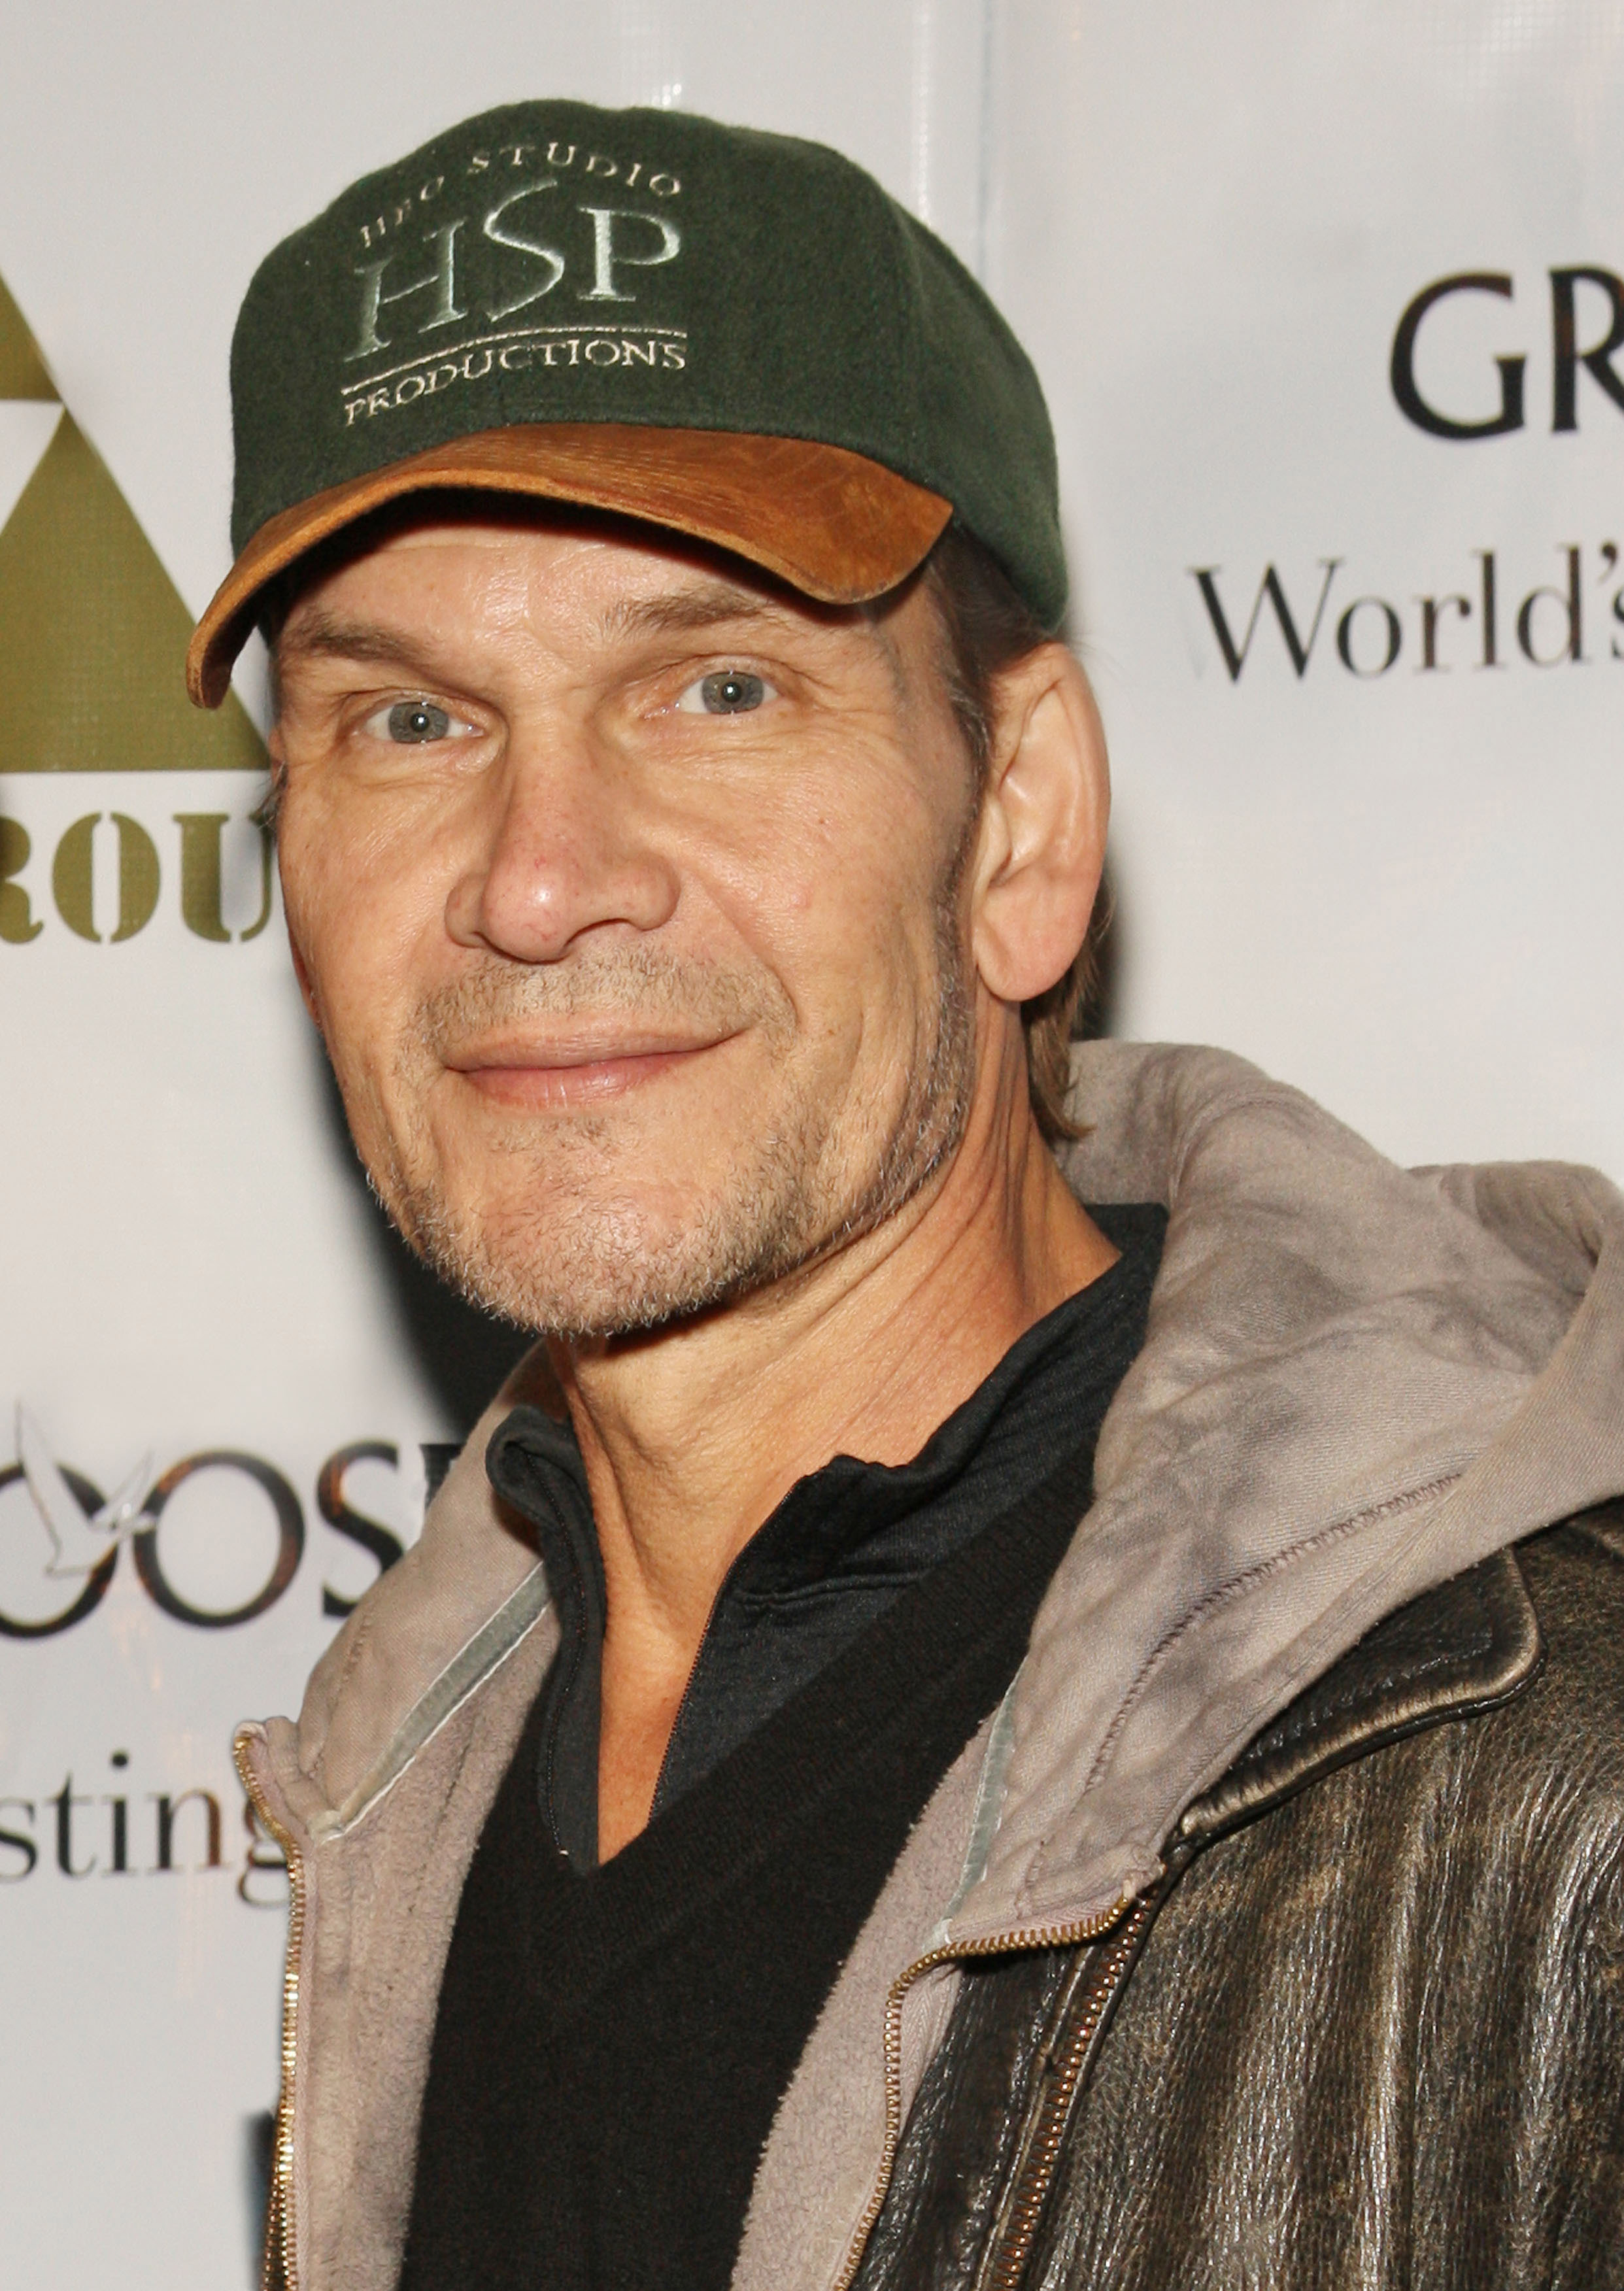 Patrick Swayze attends "The Beast Wrap" party in Chicago, Illinois on November 23, 2008 | Source: Getty Images